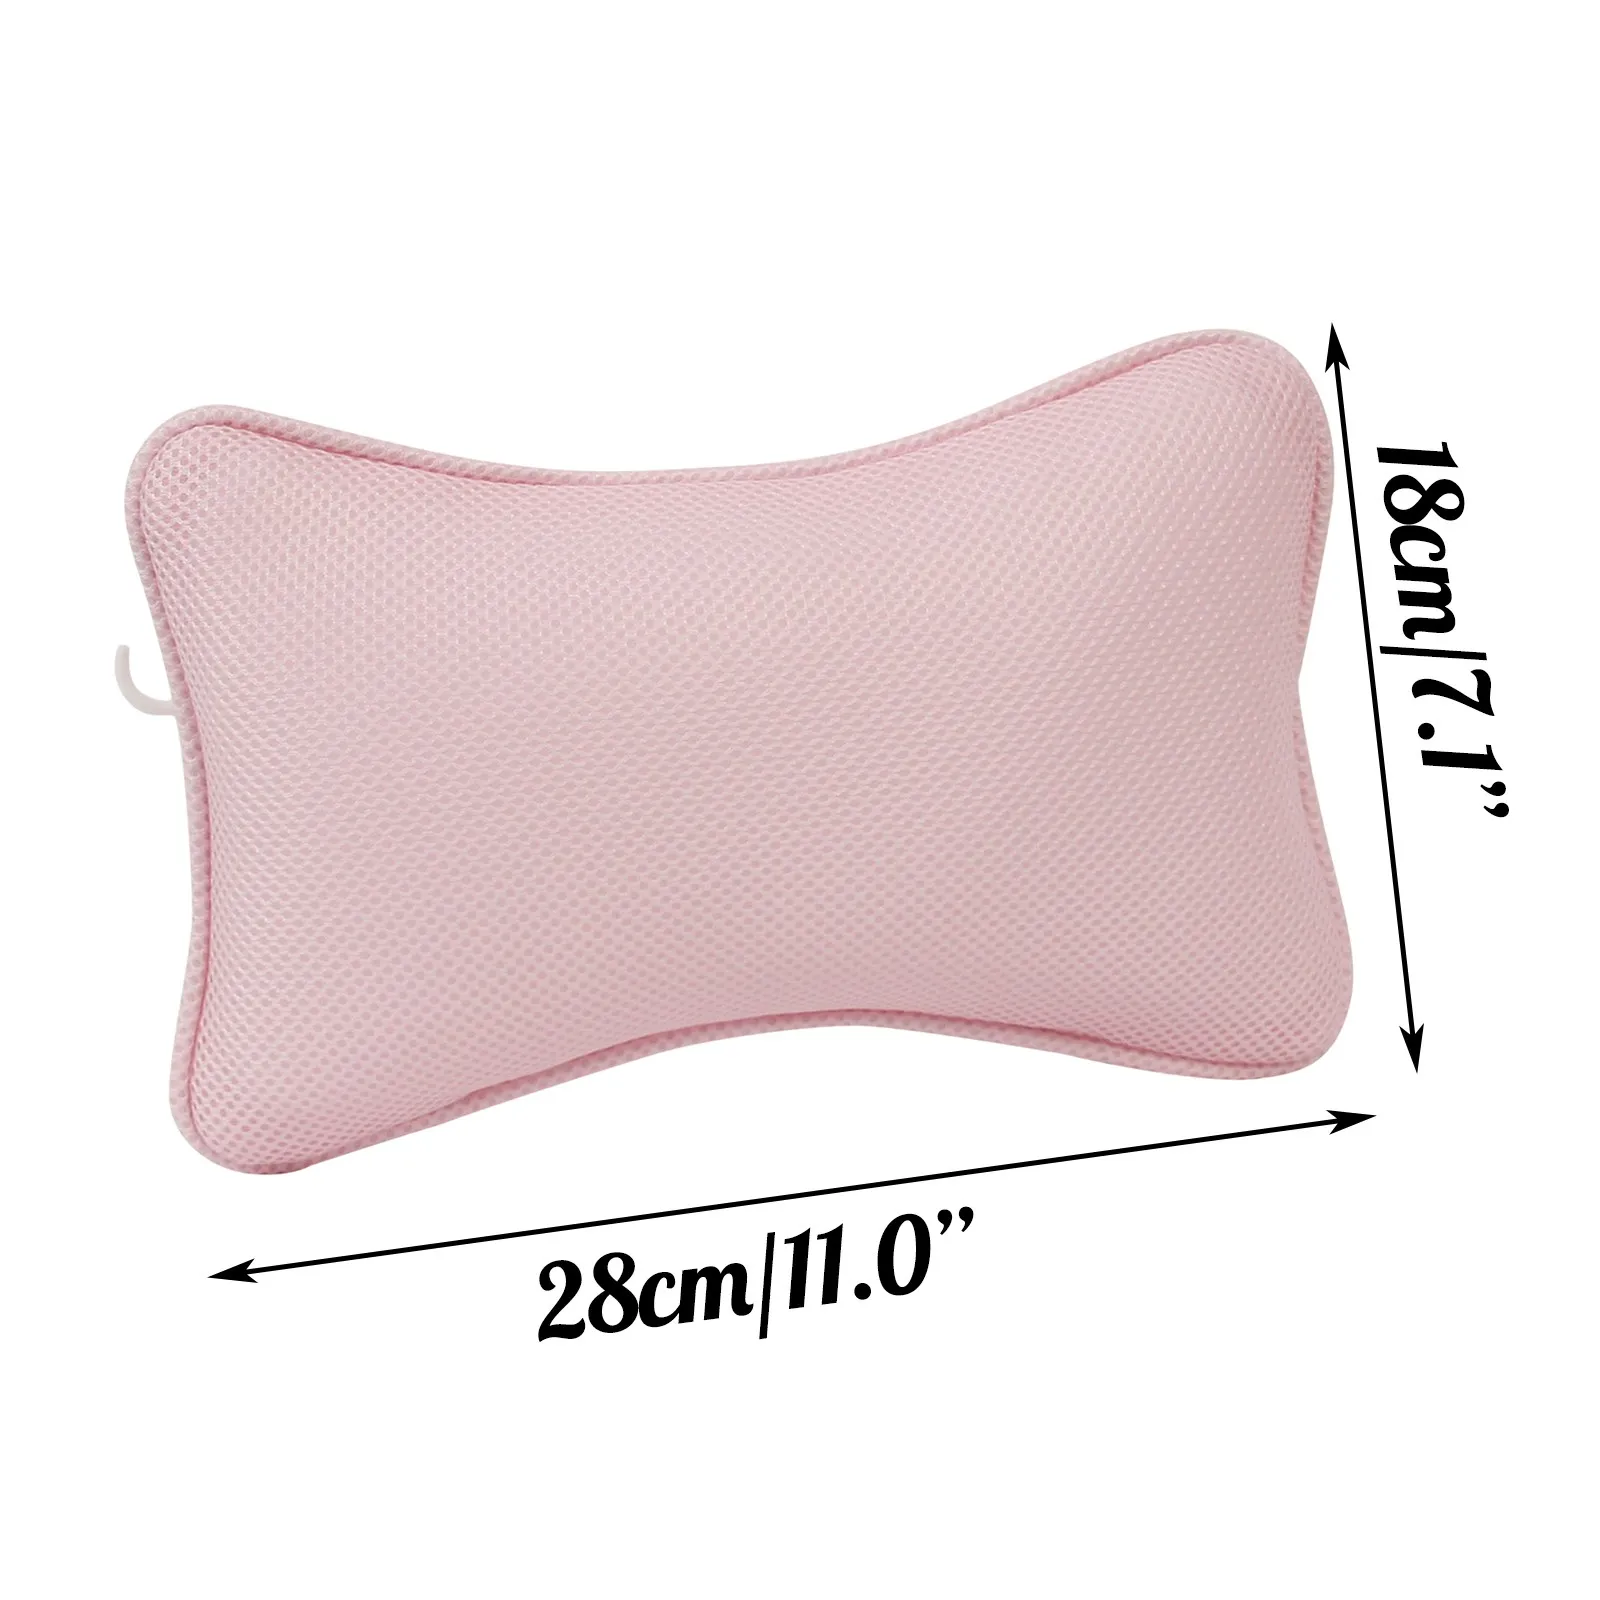 Head Rest Pillow Non-slip Cushioned Bath Tub Spa Pillow 3D Mesh Spa Bathtub with Suction Cups for Neck Back Bathroom Supply Home